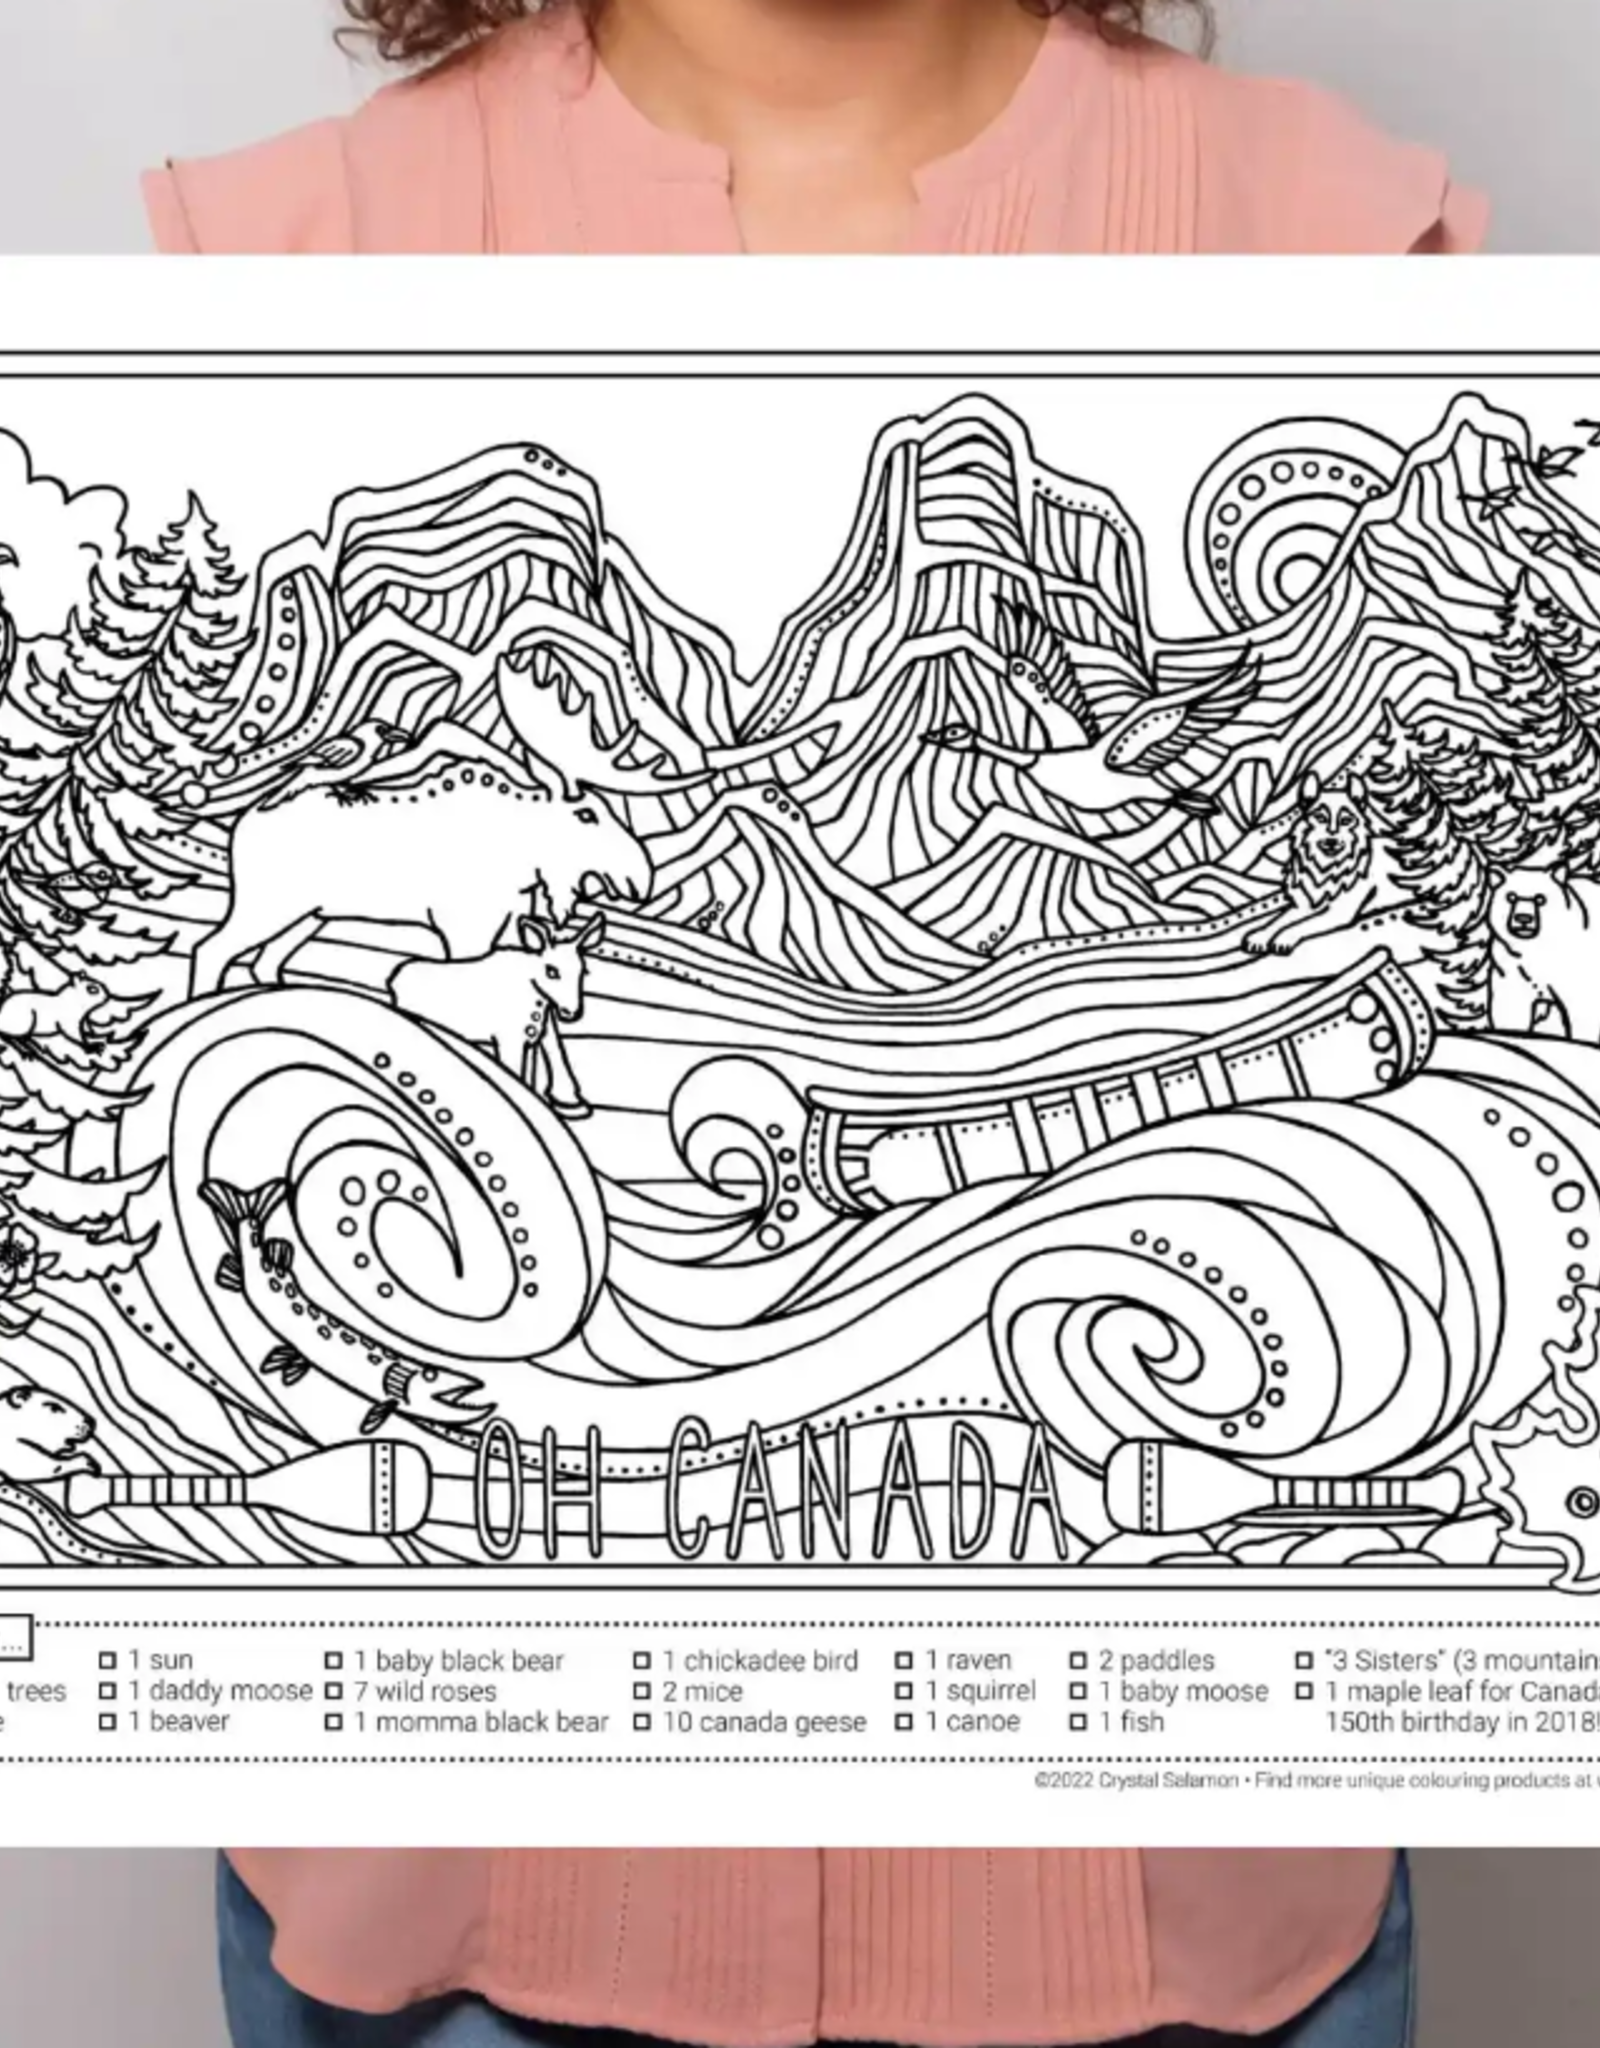 Crystal Salamon Giant Colouring Page - Canada 24" x 18"